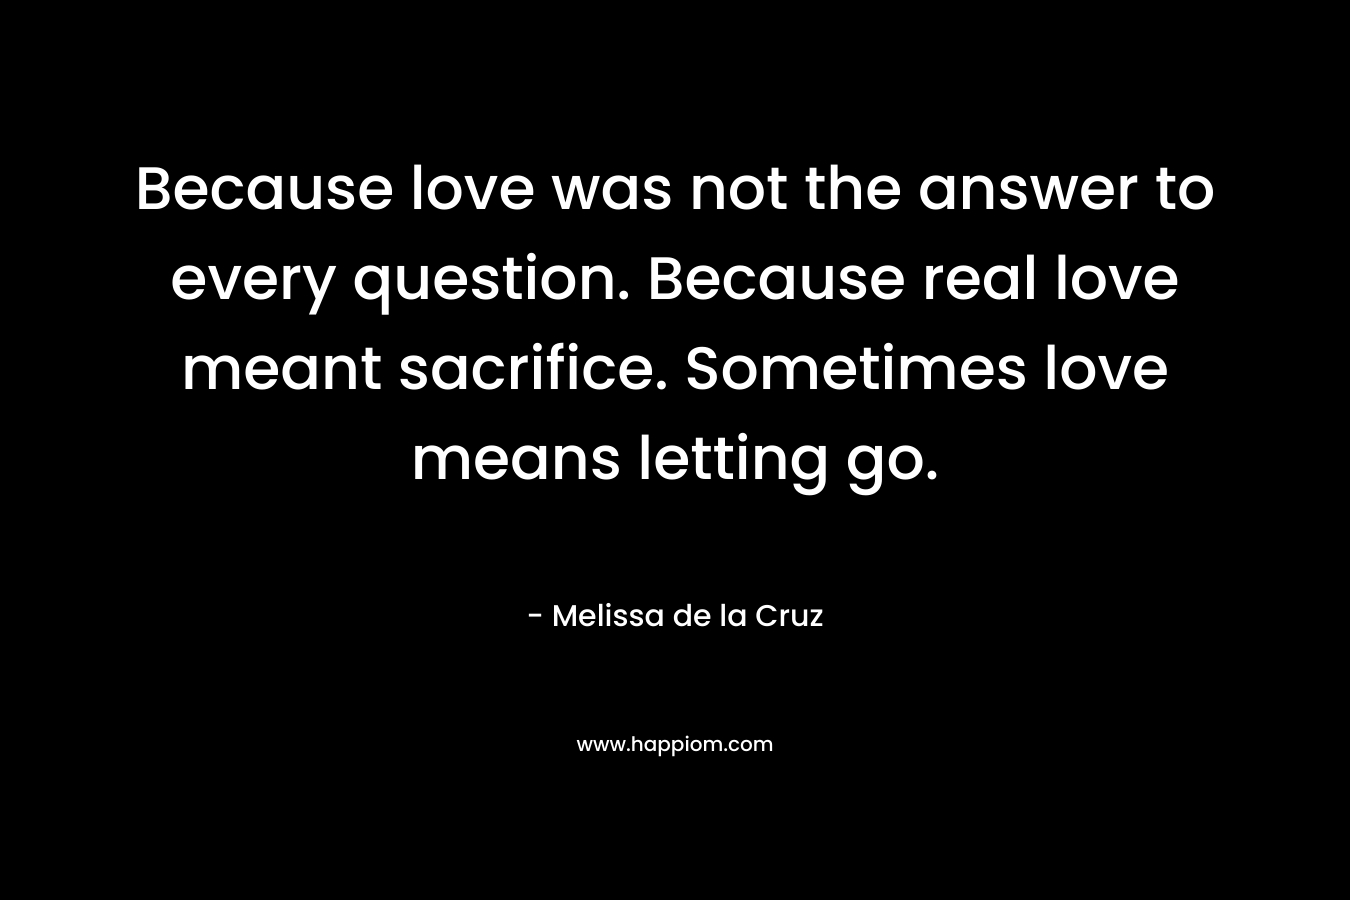 Because love was not the answer to every question. Because real love meant sacrifice. Sometimes love means letting go.